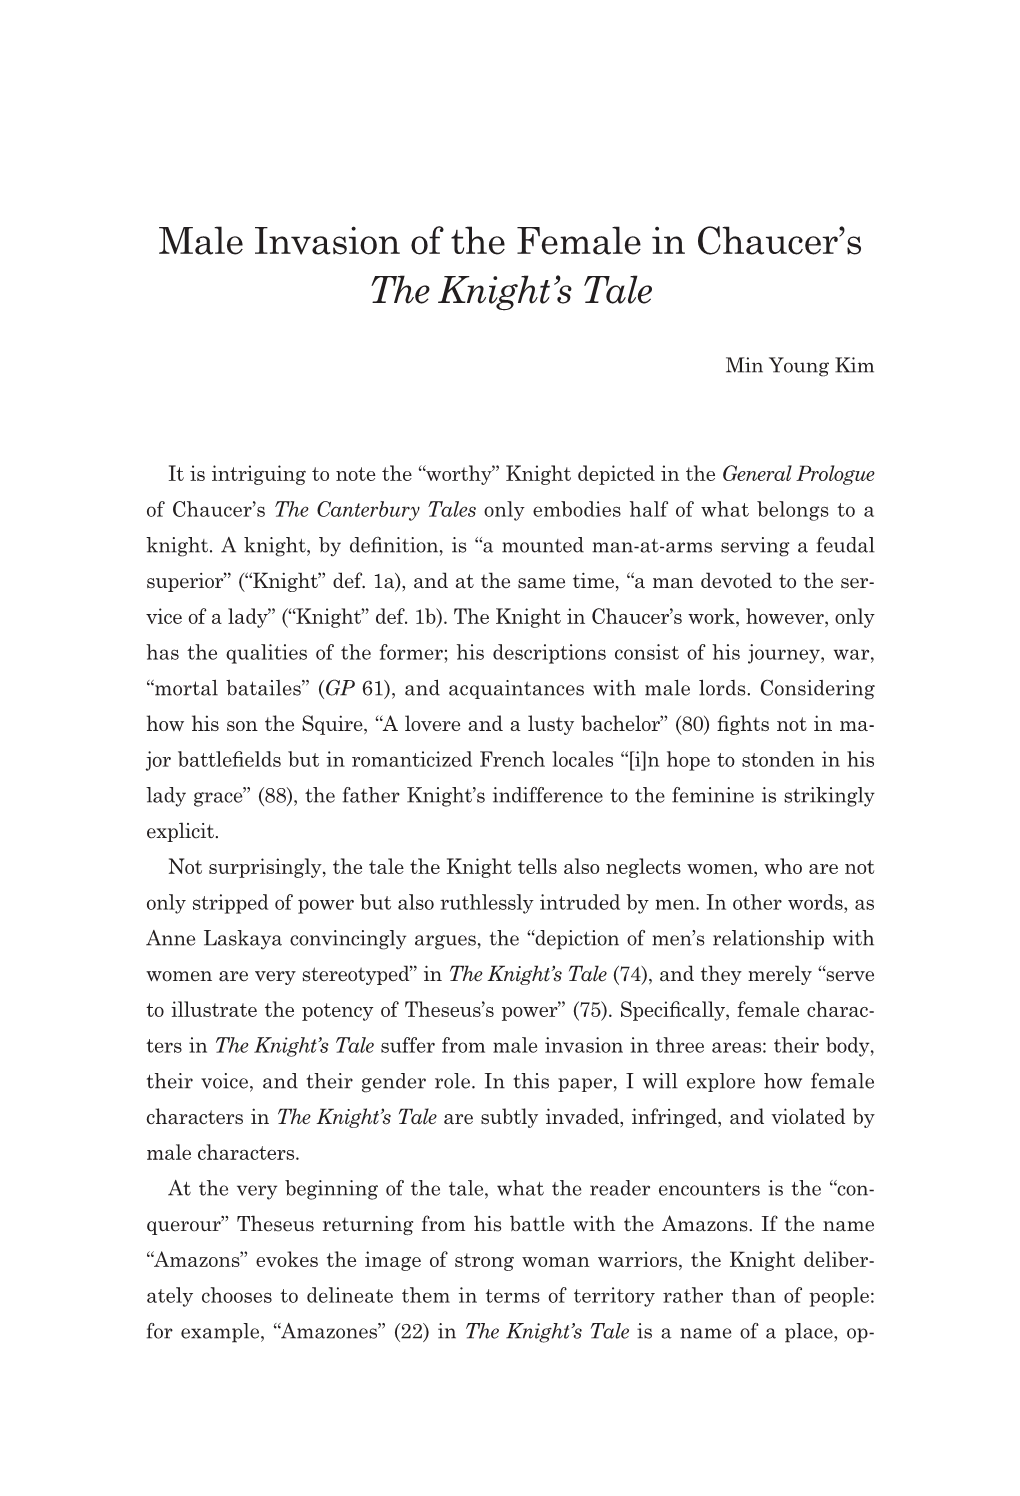 Male Invasion of the Female in Chaucer's the Knight's Tale